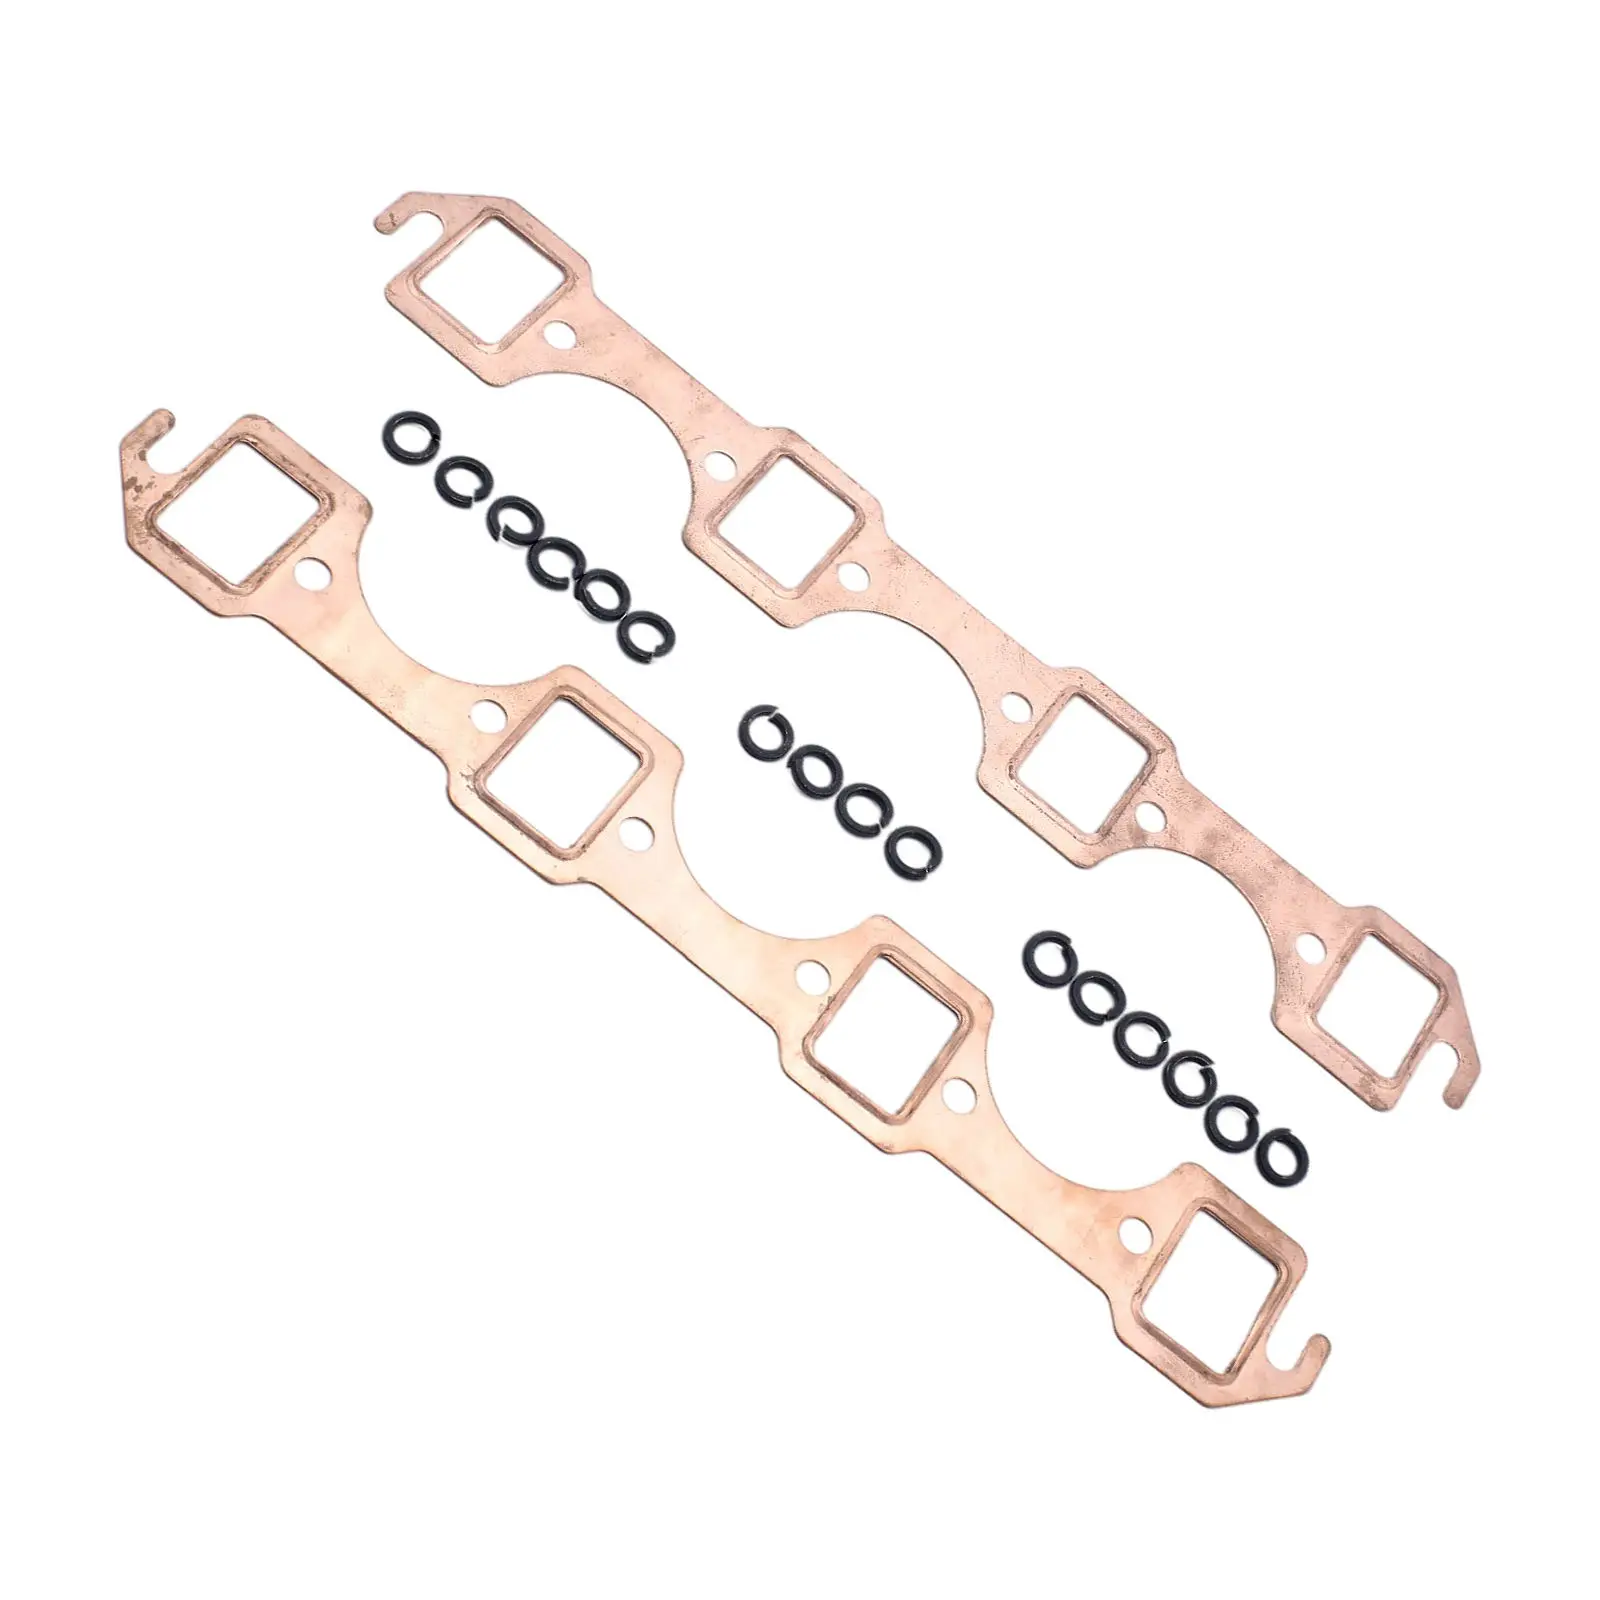 2 Pieces Exhaust Header Gaskets Plating Small Block Port Gasket Reusable Copper for Ford 289 4.8L 351W 5.8L 260 4.3L 62-86